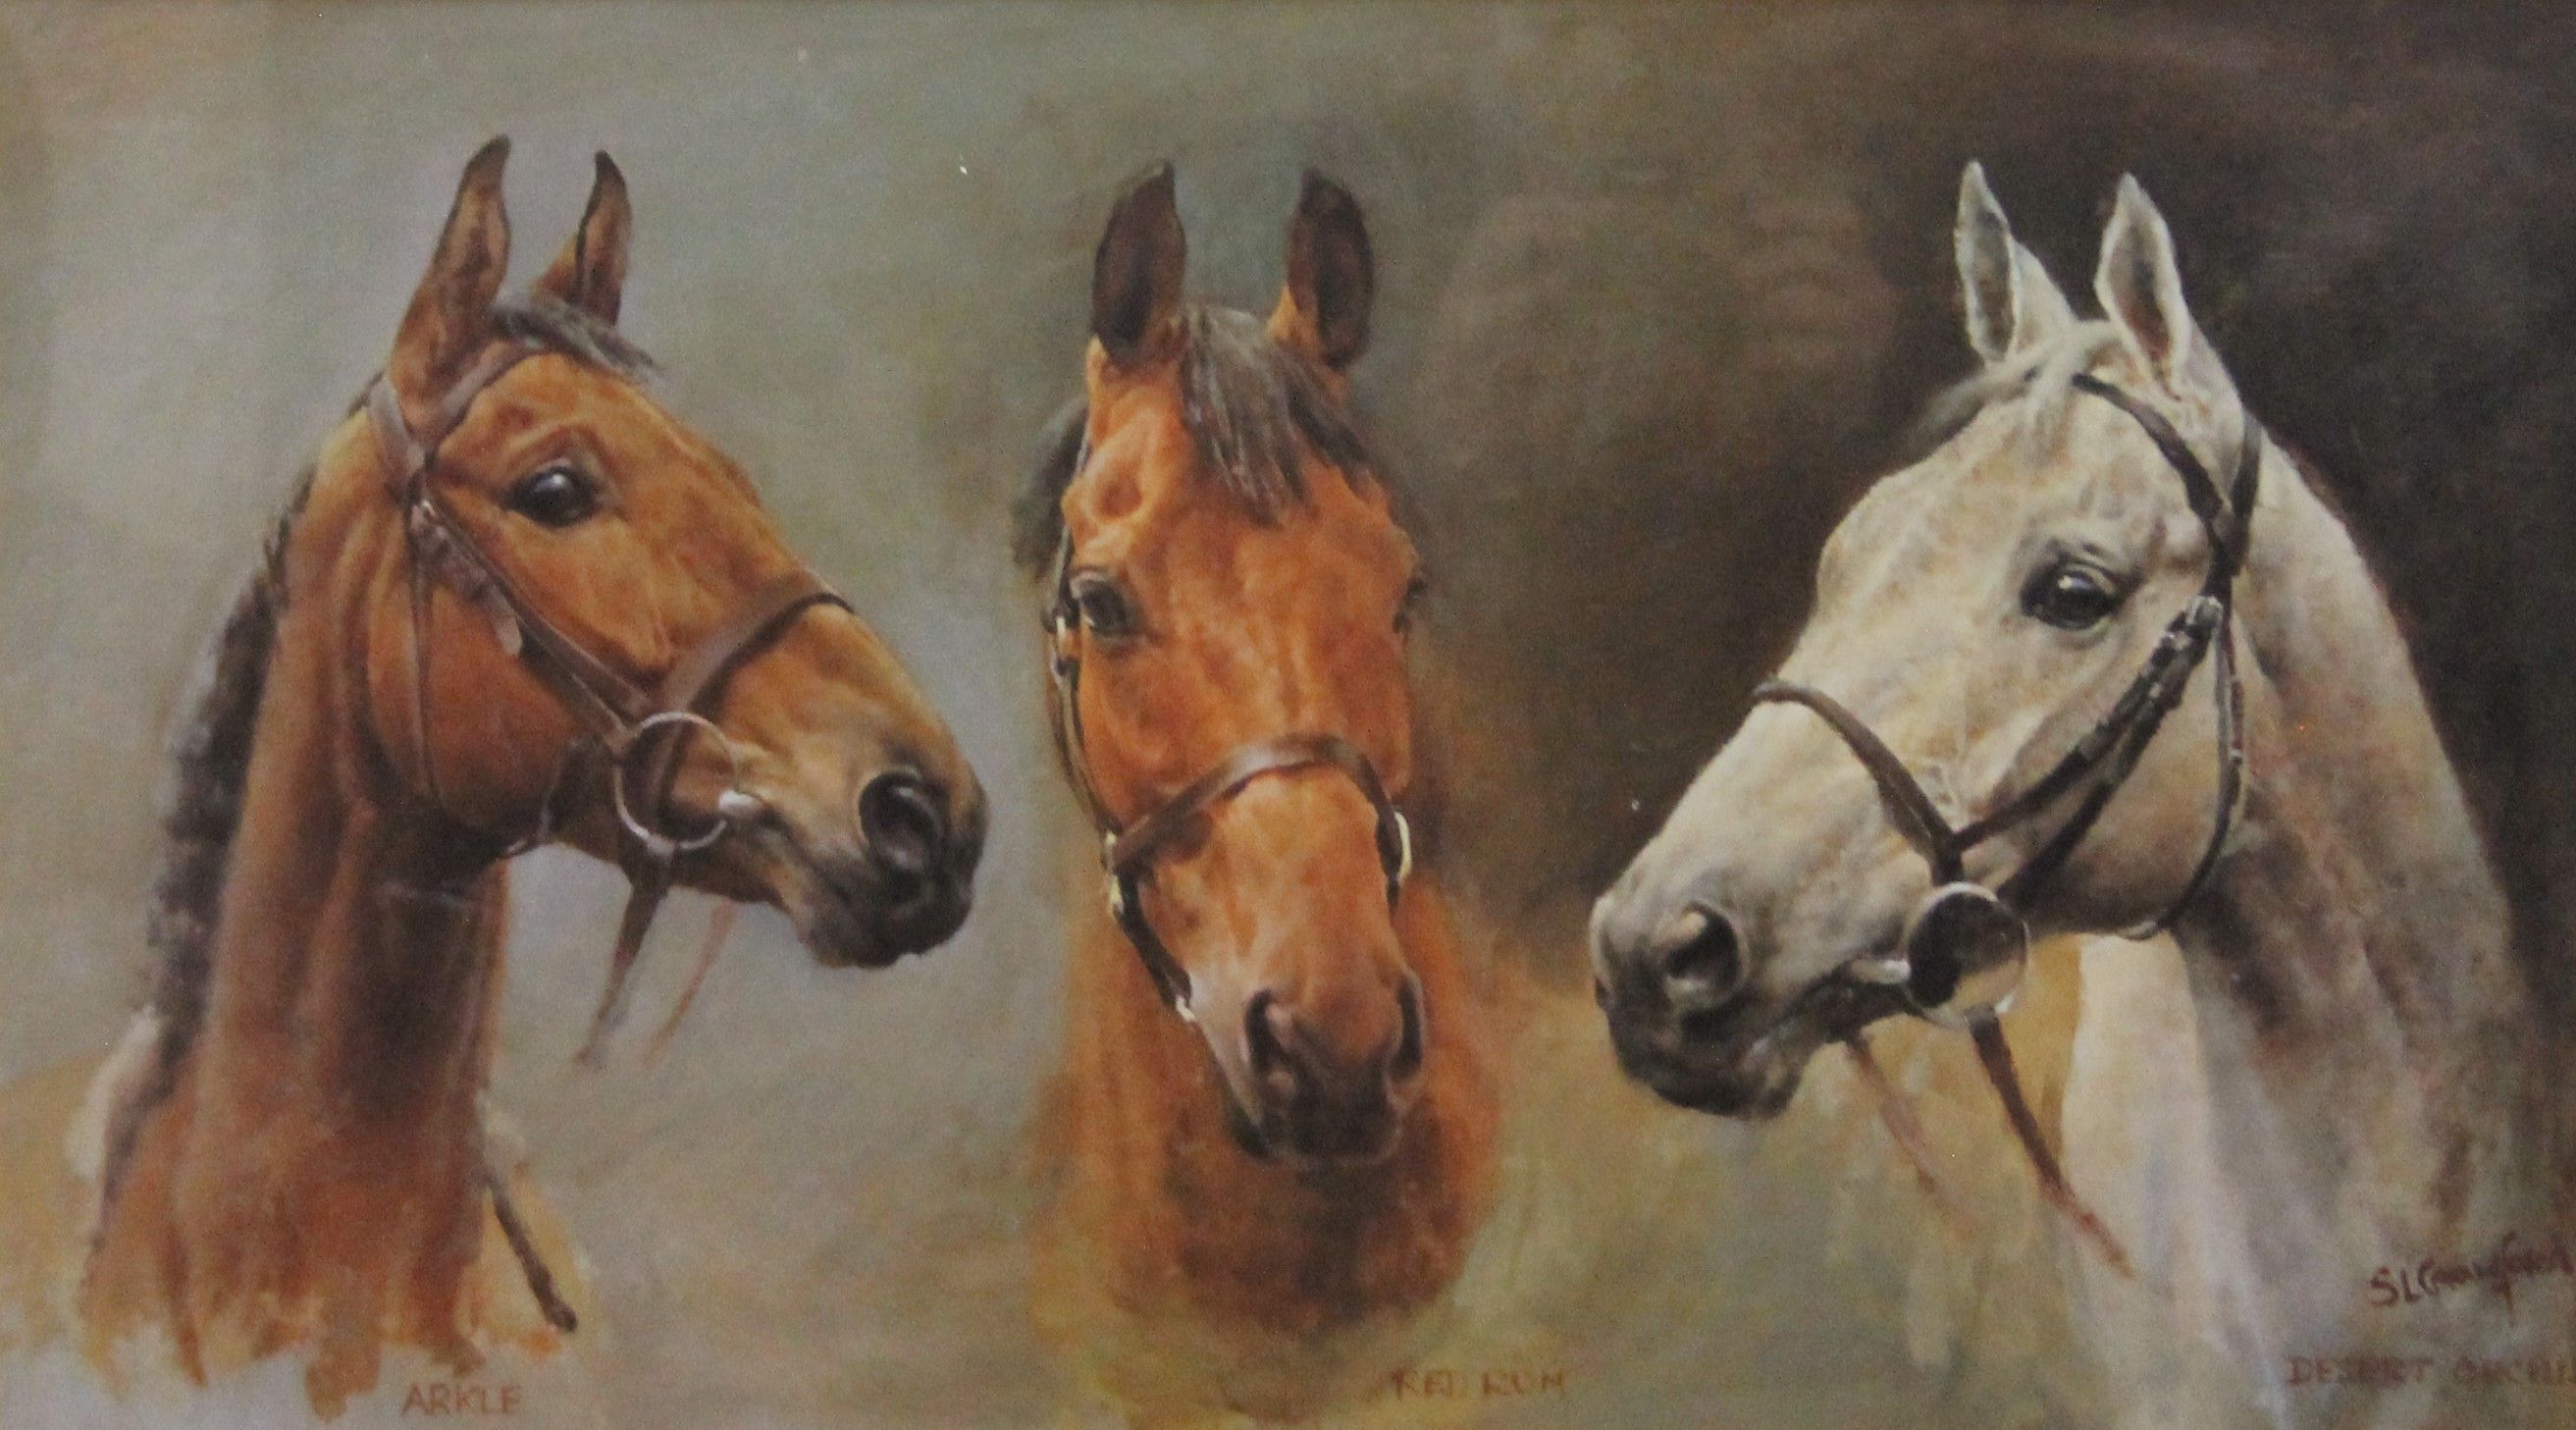 C L CRAWFORD, We Three Kings (Arkle, Red Rum and Desert Orchid), print, framed and glazed.